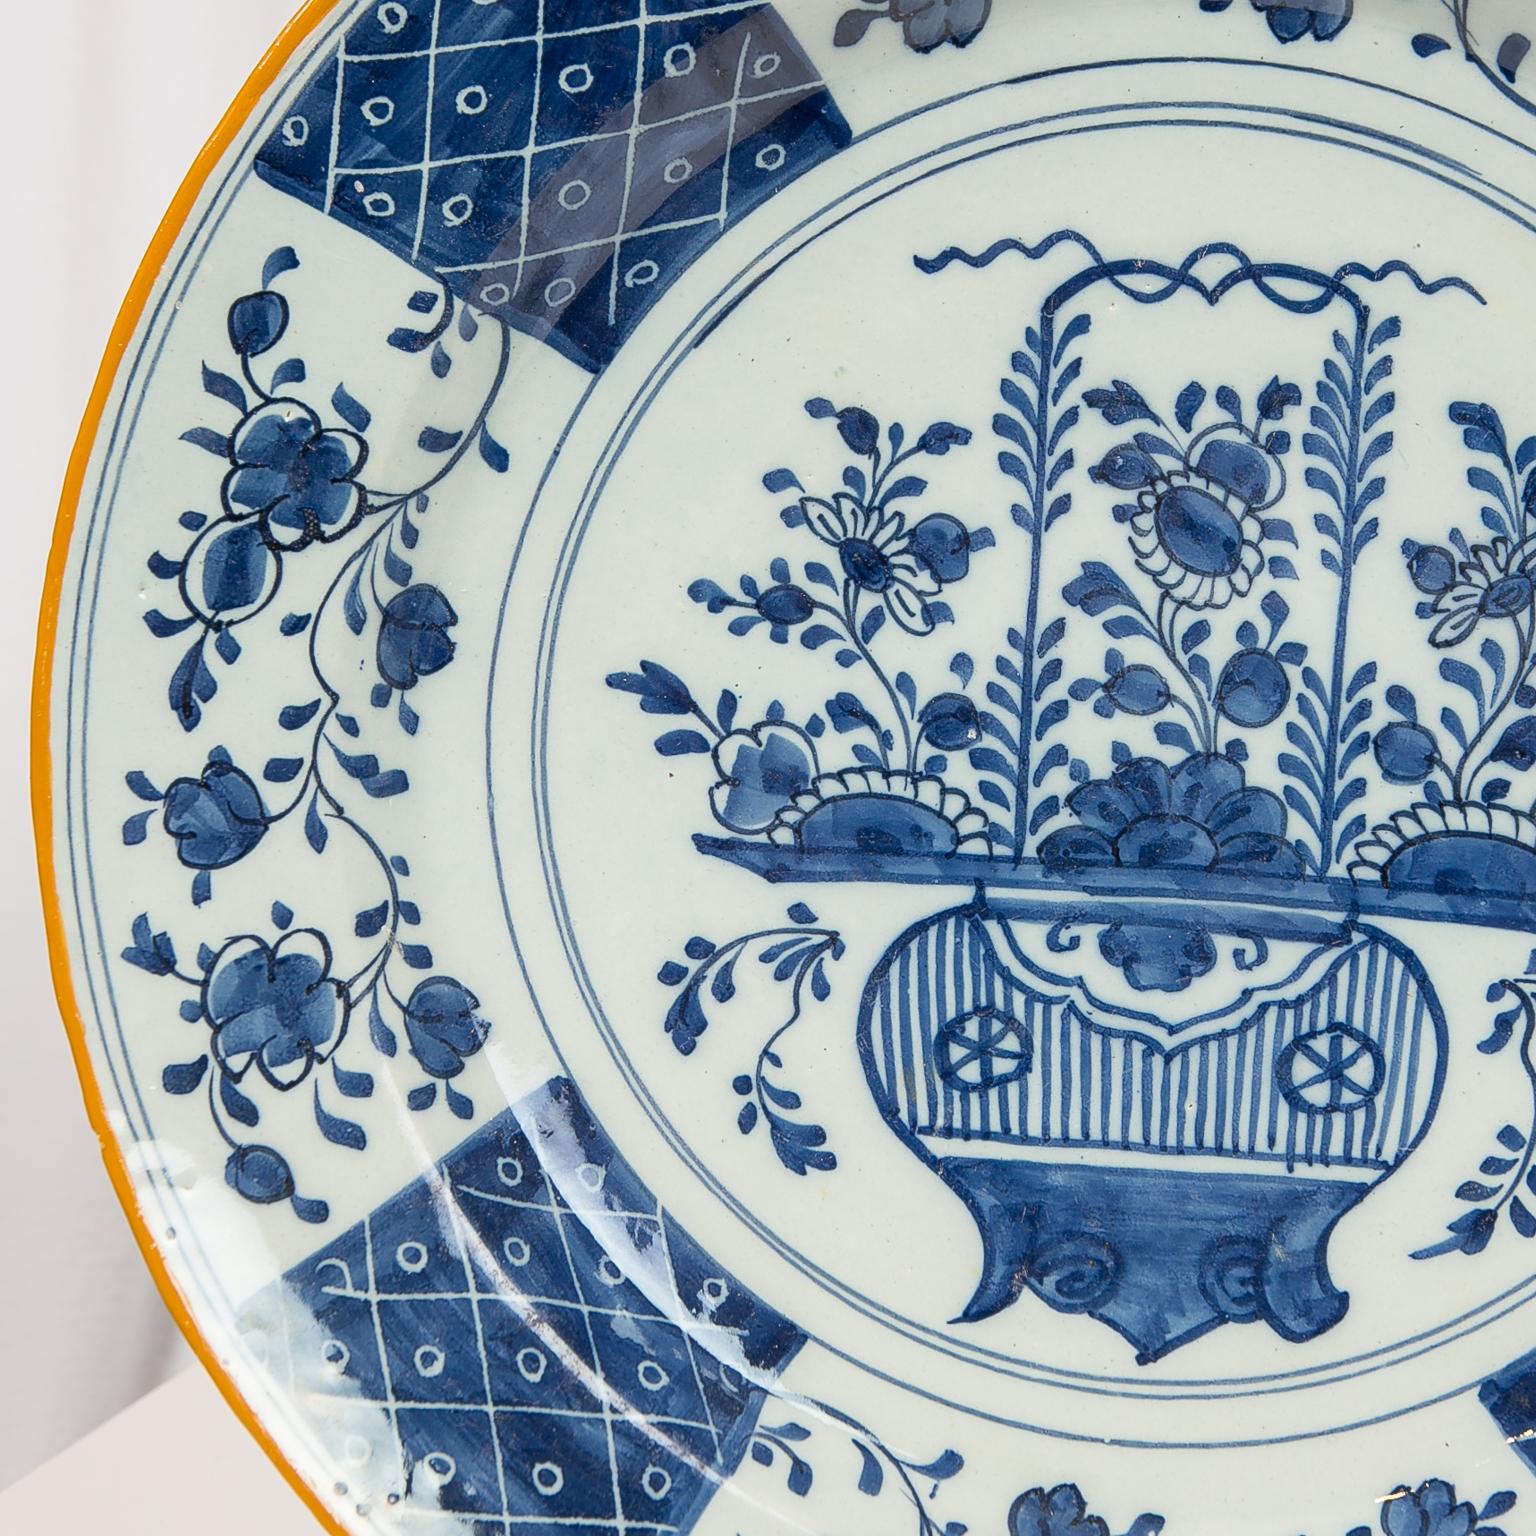 We are pleased to offer this pair of Dutch Delft blue and white chargers decorated in the center with an image of a delicate vase filled with chrysanthemums and peonies. 
The design in the center of the charger is derived from Chinese decoration,